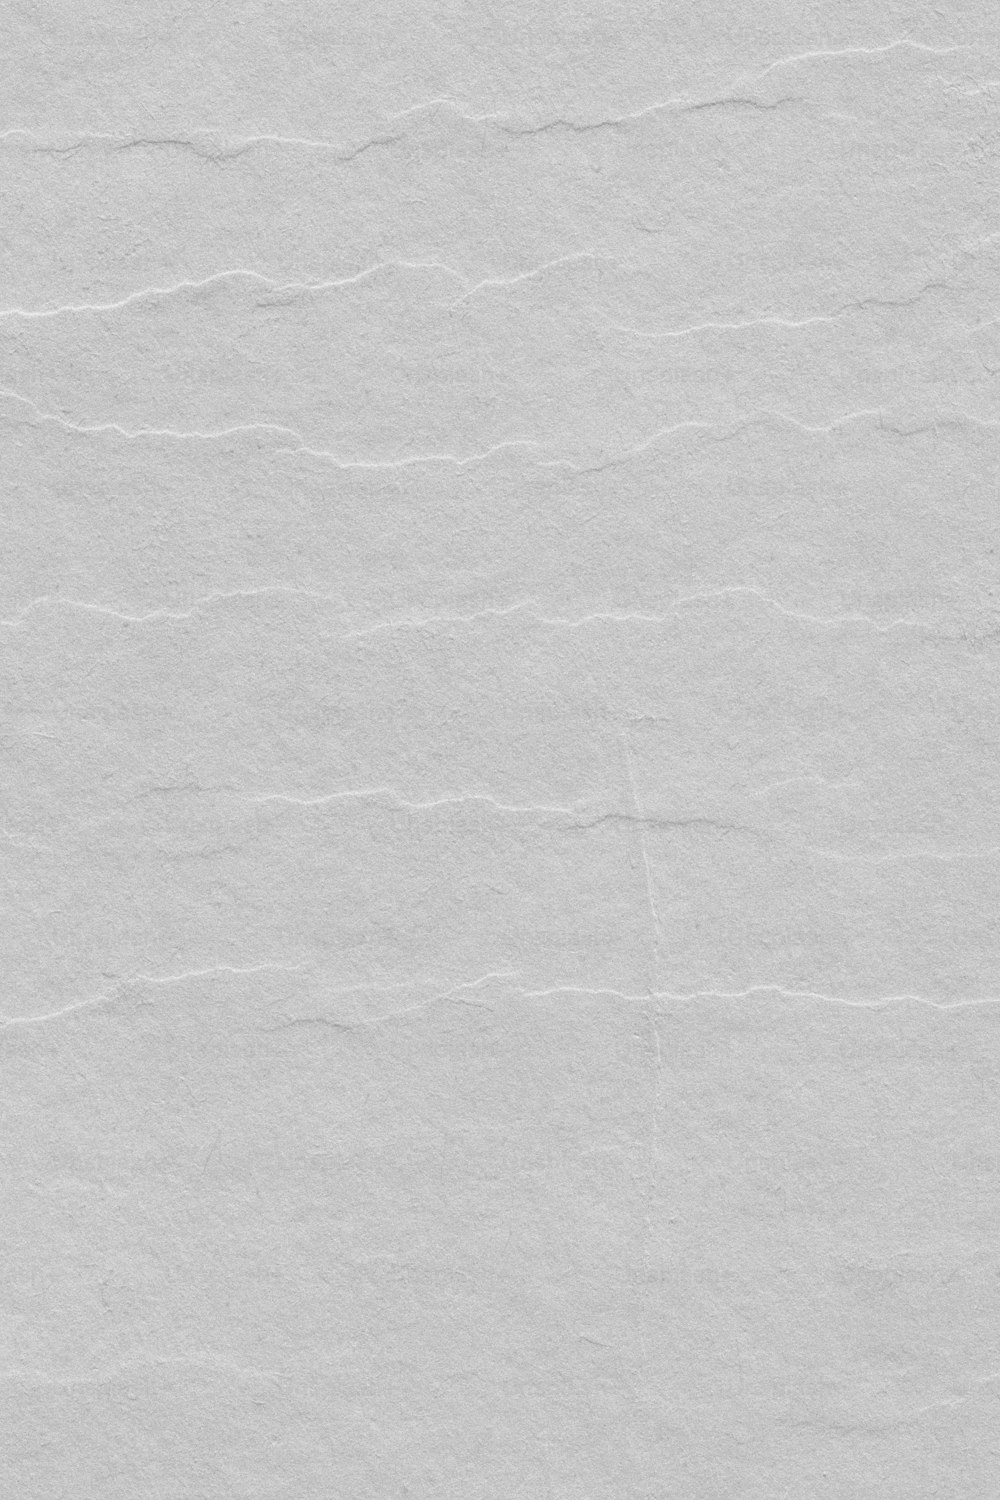 a white piece of paper with some lines on it